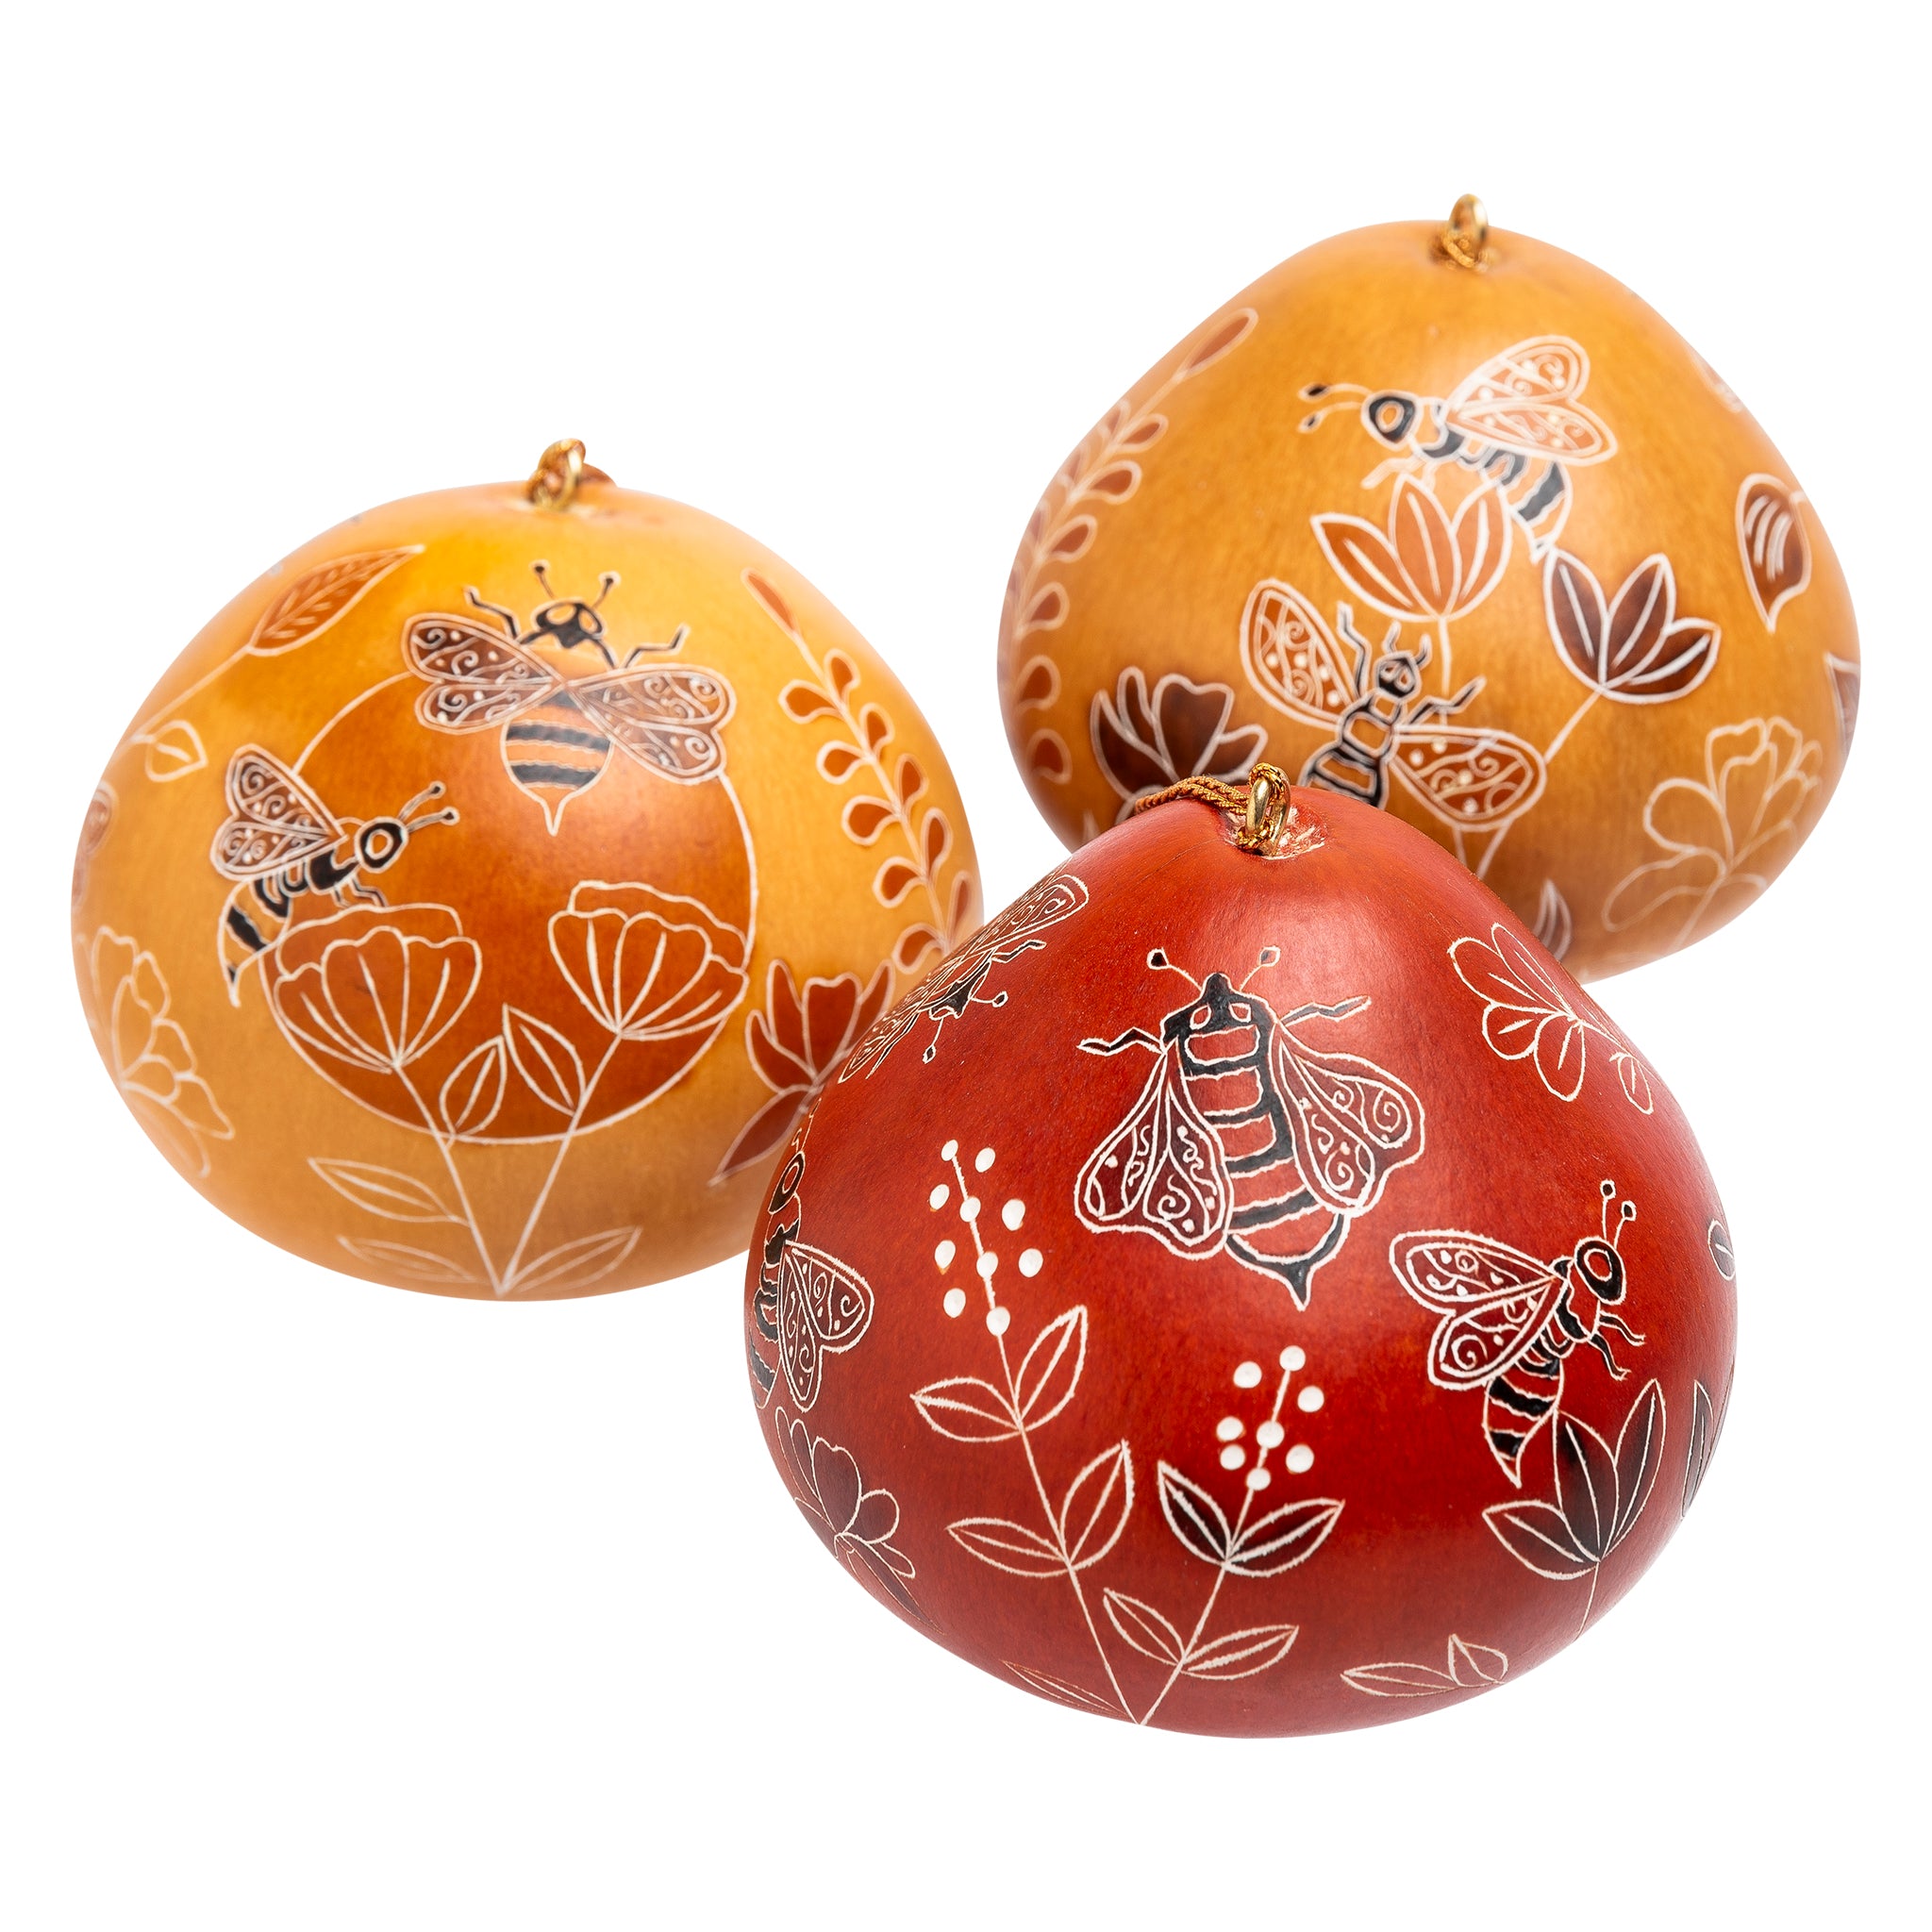 Bees & Wild Flowers - Gourd Ornament